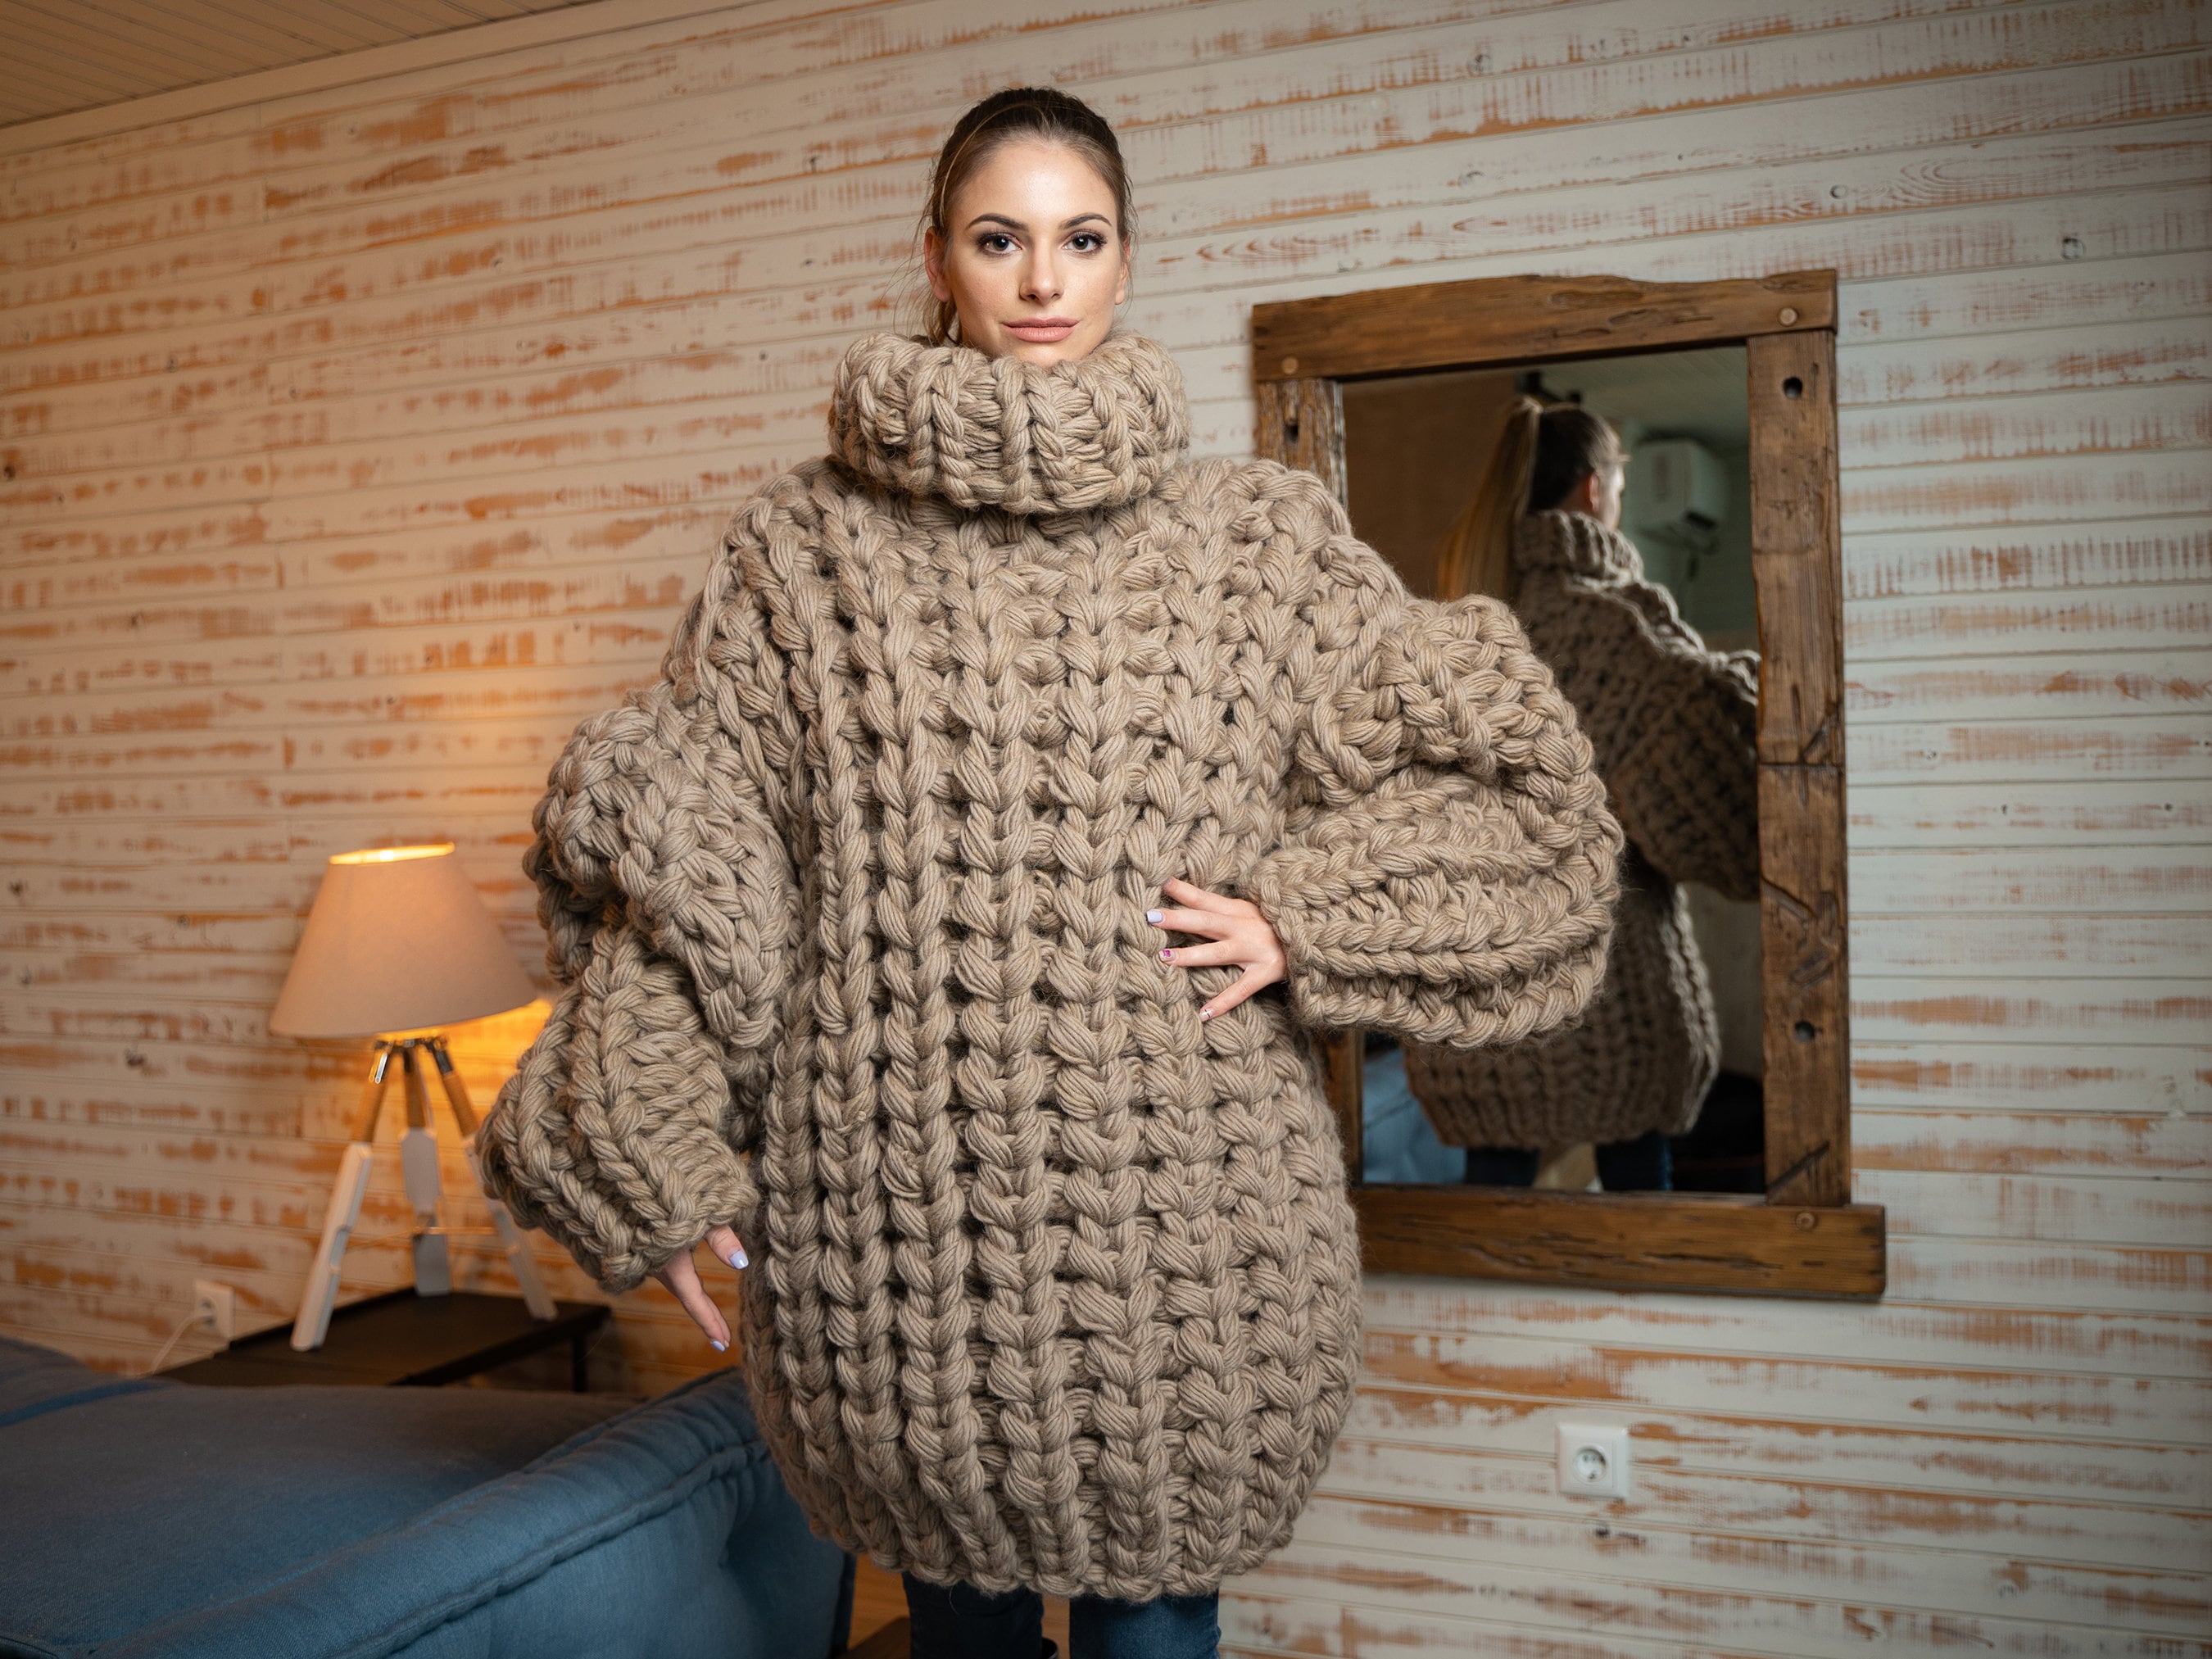 6 Kilograms Huge Hand Knit Wool Sweater Made of 100 % Soft Wool T1101 